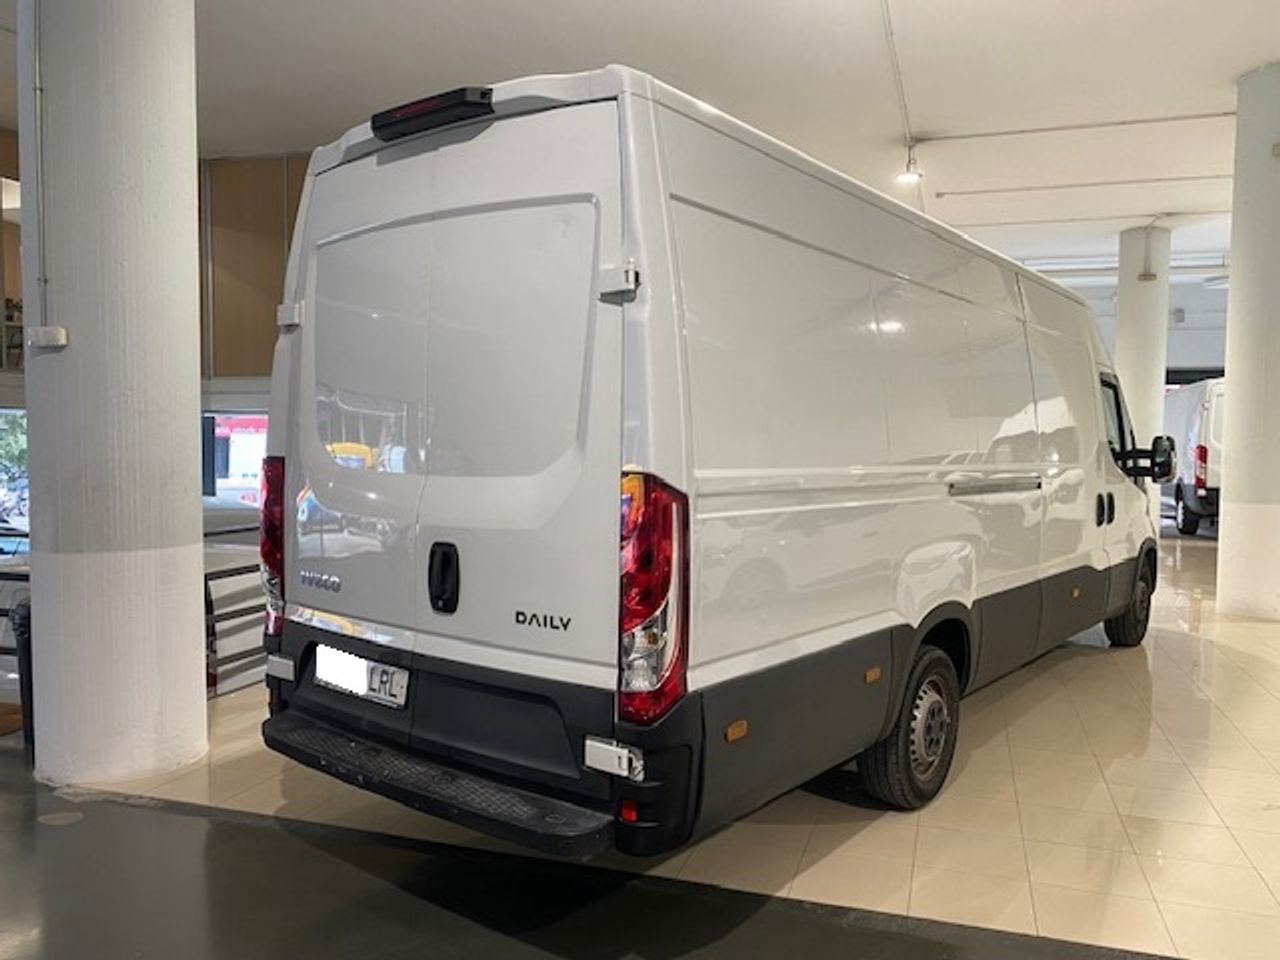 Foto Iveco Daily 8